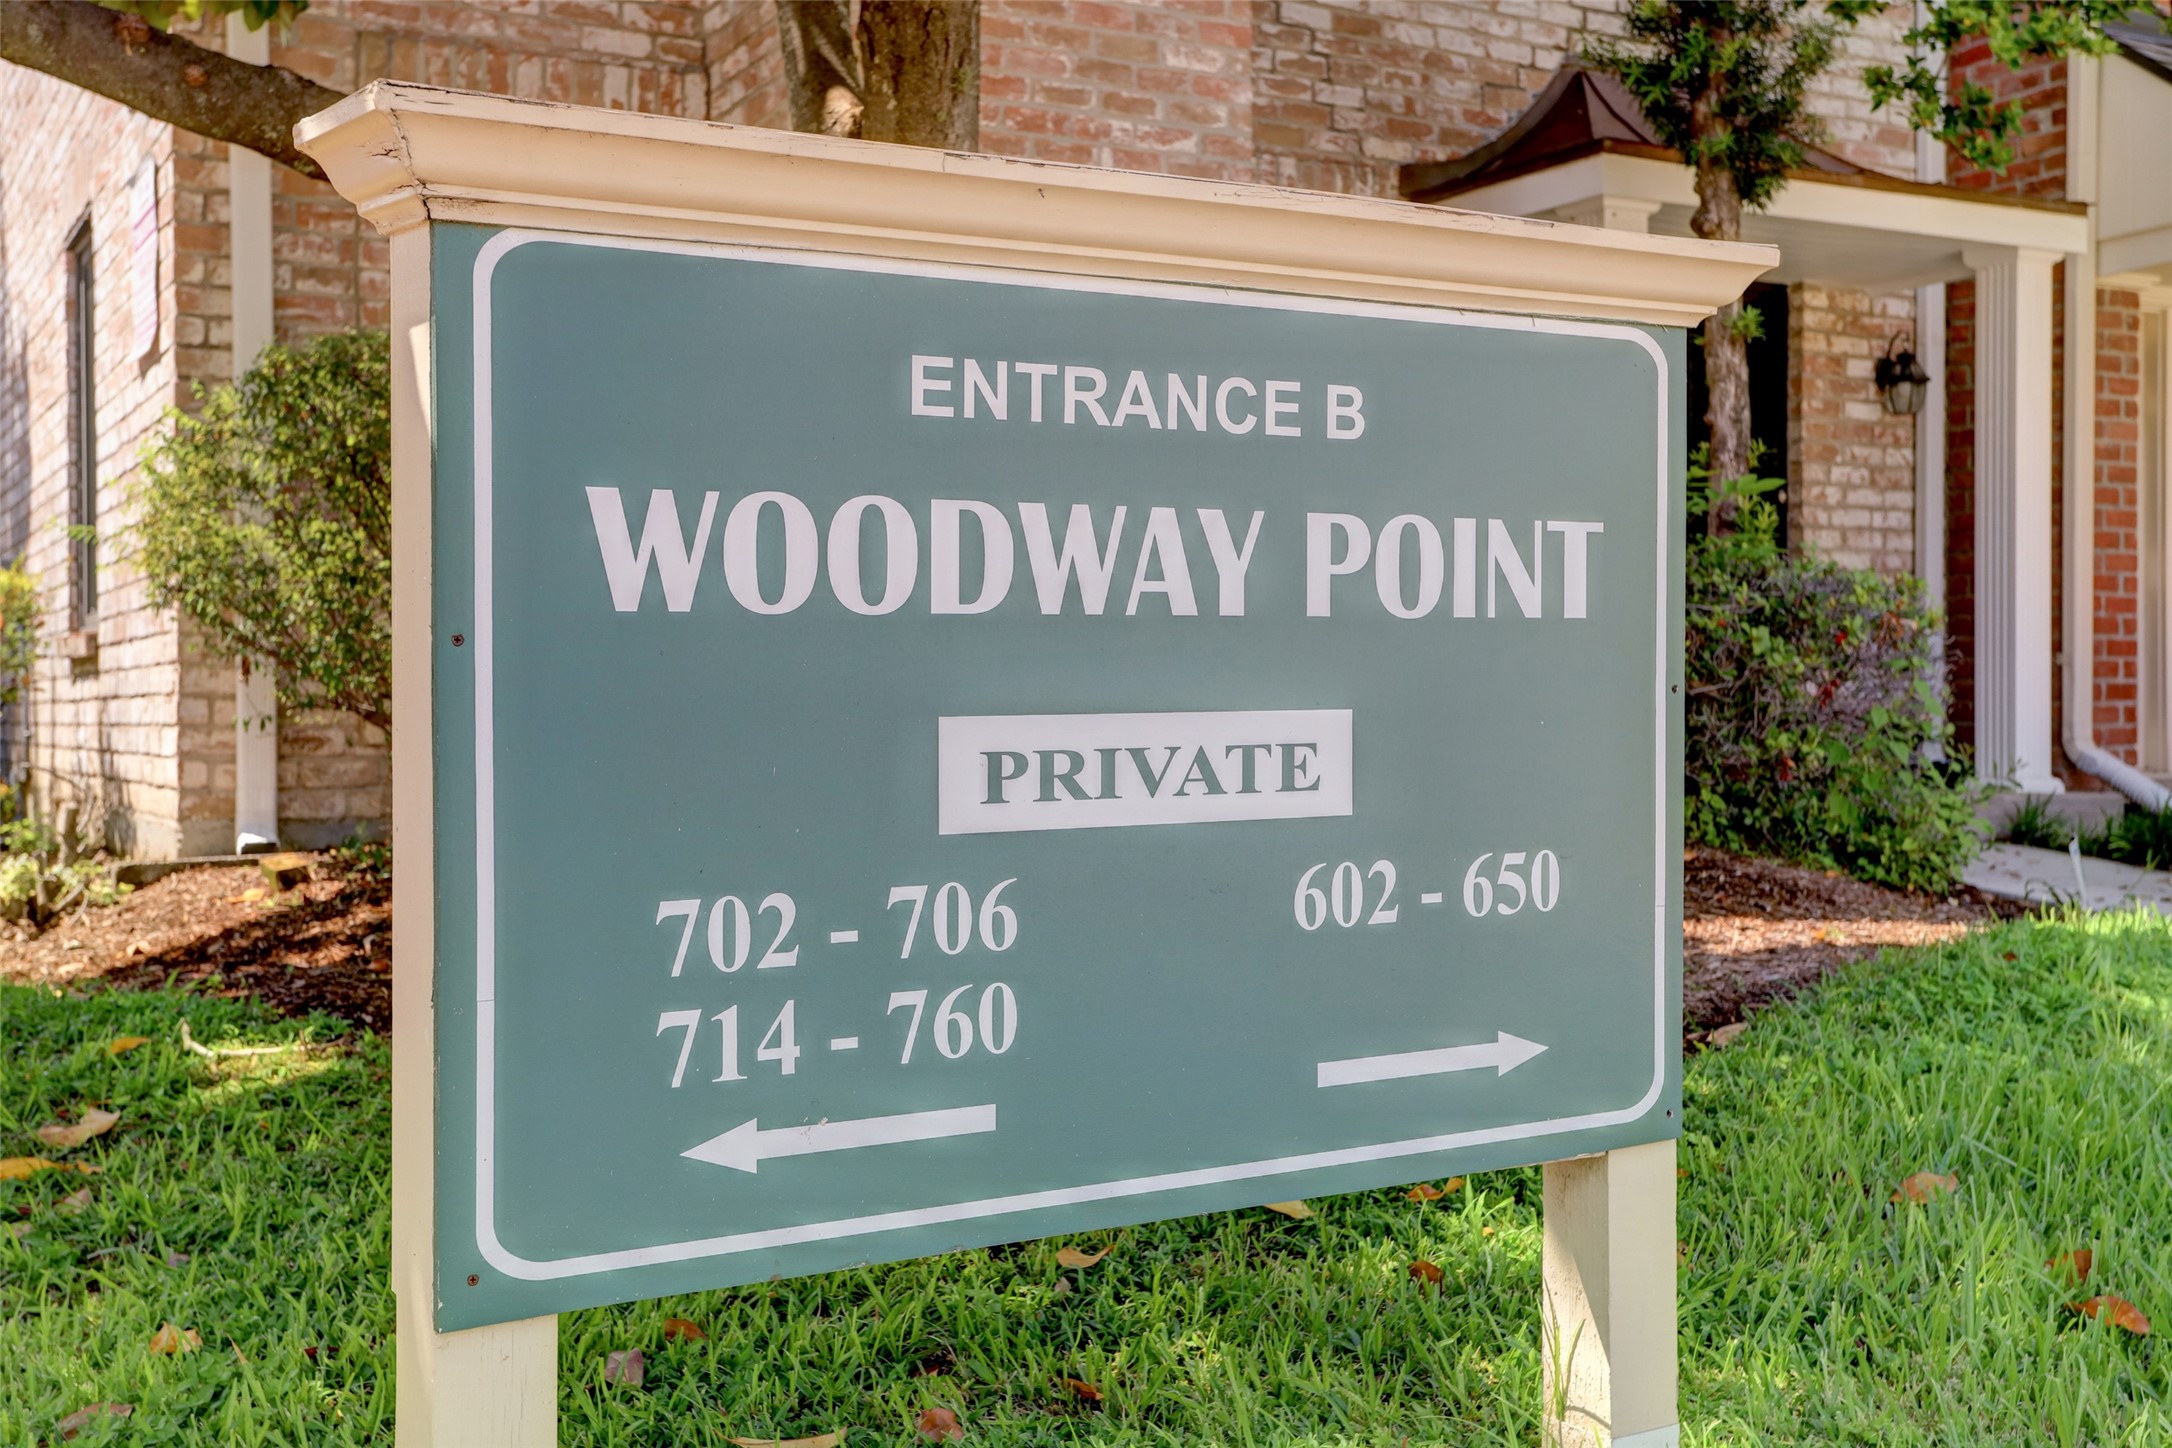 Woodway Point is a well-managed HOA, featuring two tennis courts, two swimming pools, and a clubhouse for its residents. The monthly HOA fee includes a comprehensive range of services such as exterior building maintenance, cable TV, water, sewer, grounds keeping, and access to recreational facilities. The community also has a range of exciting activities planned, providing ample opportunities for residents to socialize and meet their neighbors.